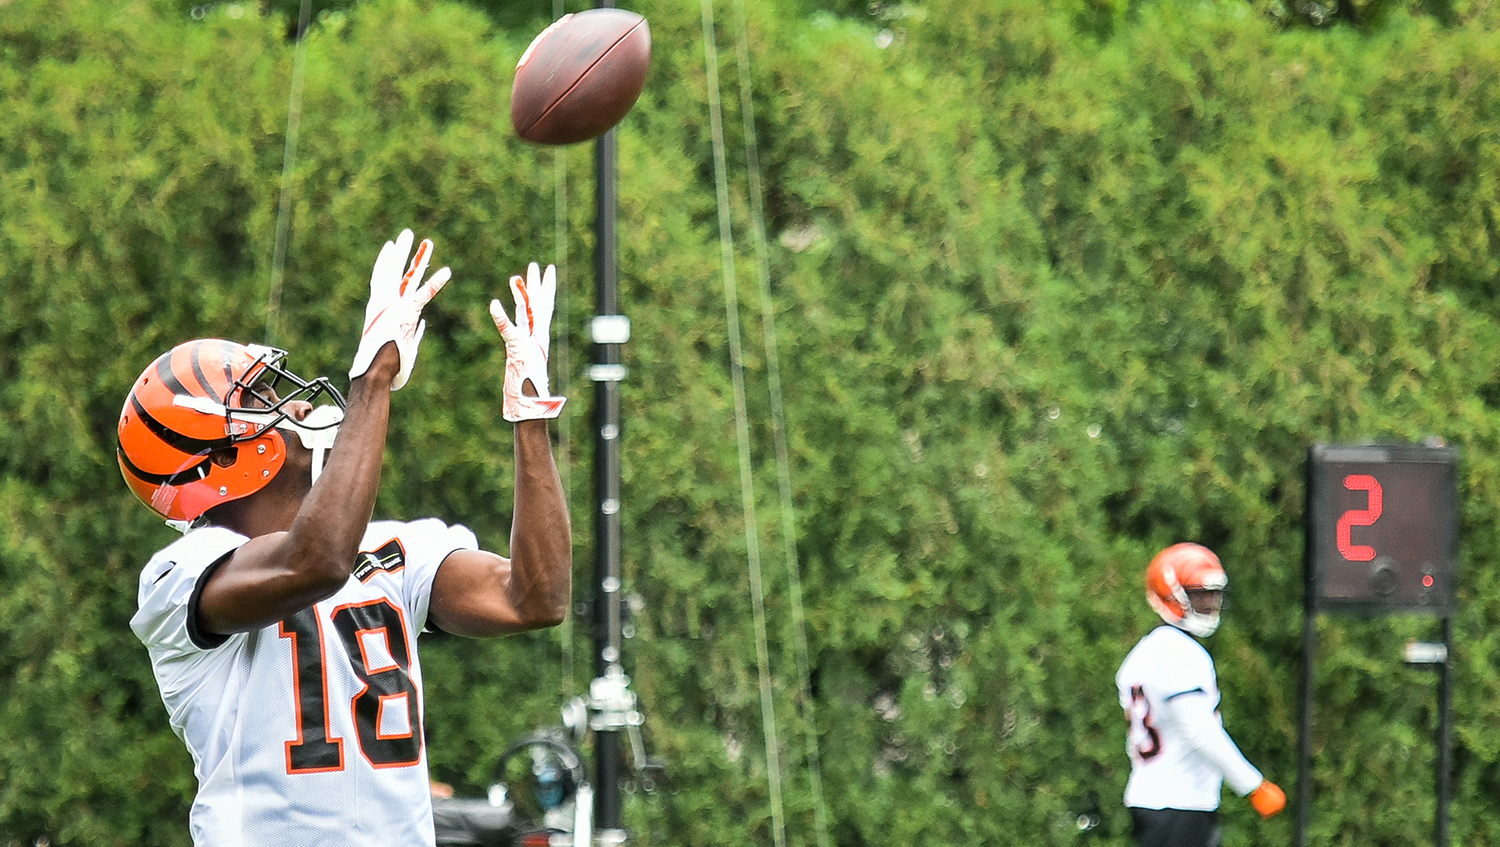 17: A.J. Green (WR, Bengals), Top 100 Players of 2017